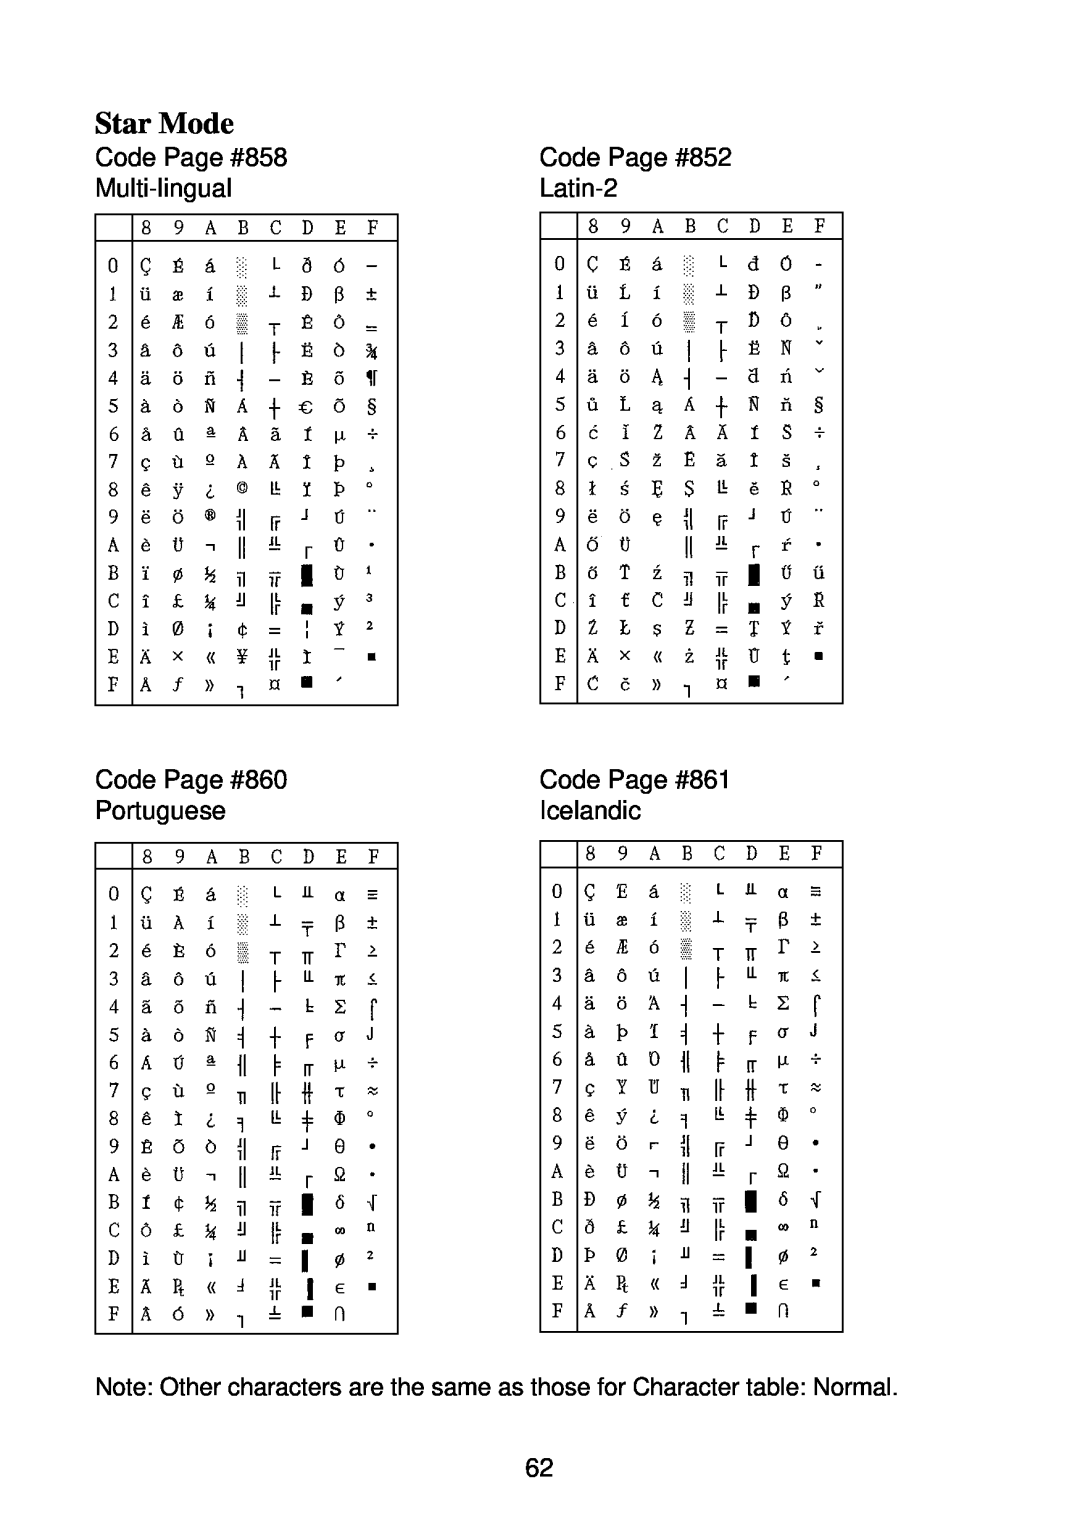 Star Micronics SP2000 manual Code Page #858 Multi-lingual Code Page #860 Portuguese, Star Mode 